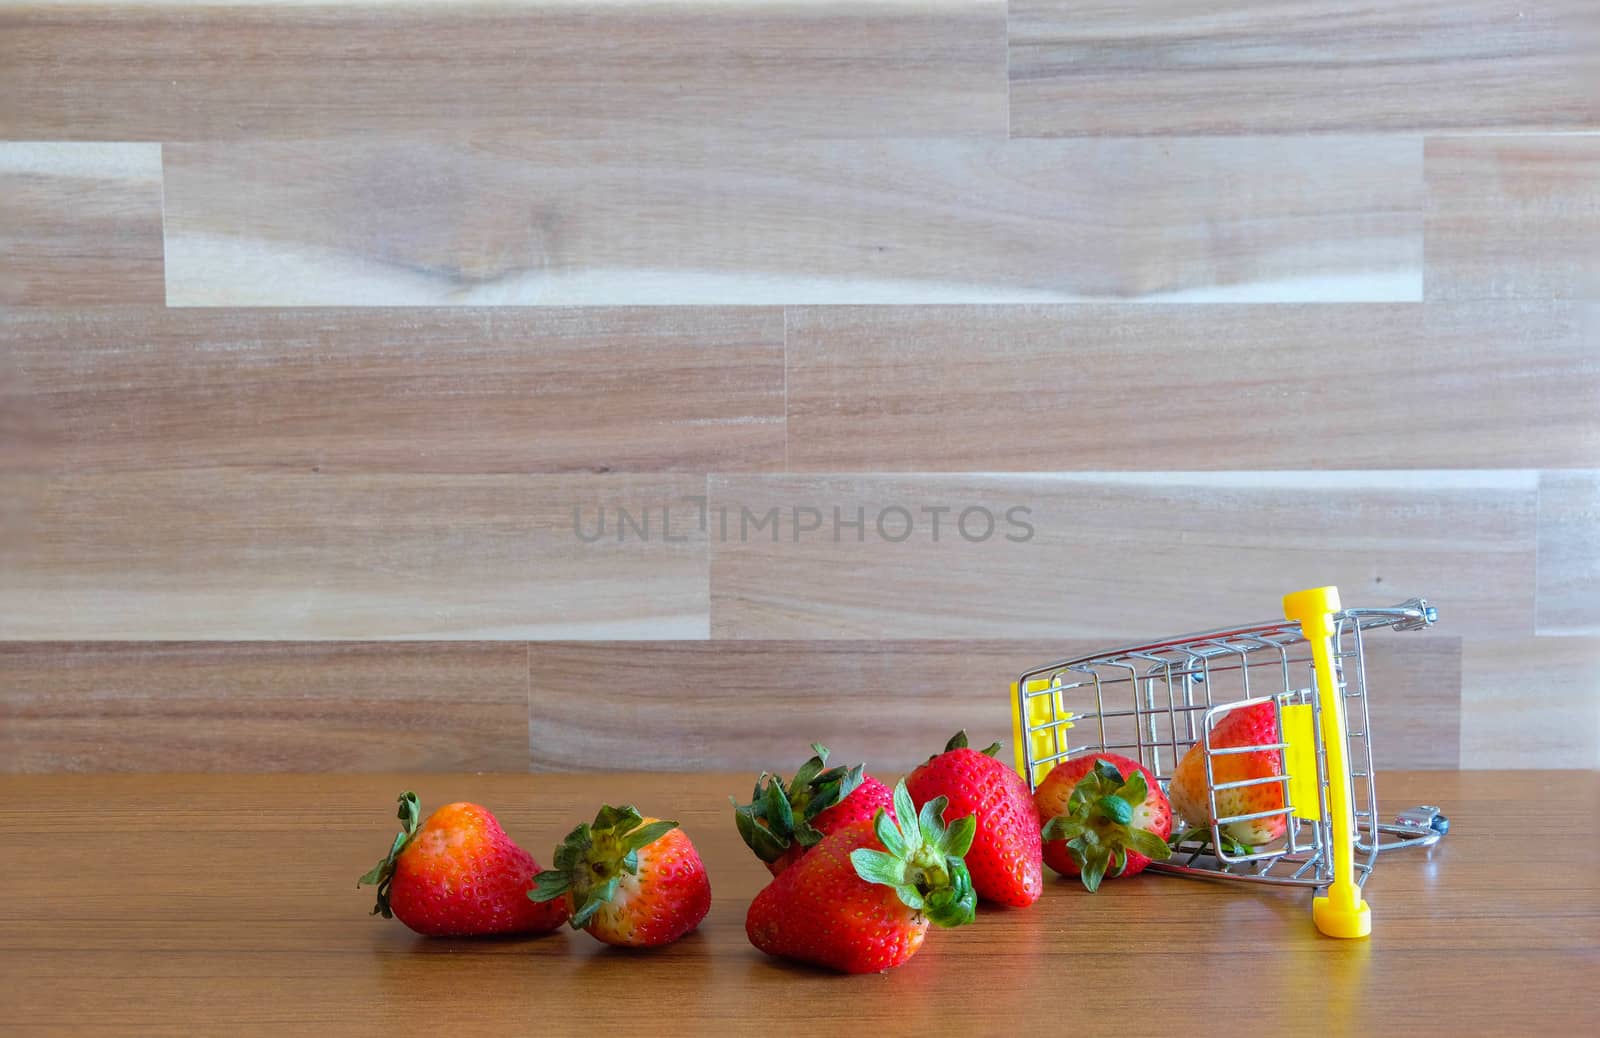 Close up strawberry on shopping cart with white and brown wooden background text advertising, diet food healthy food